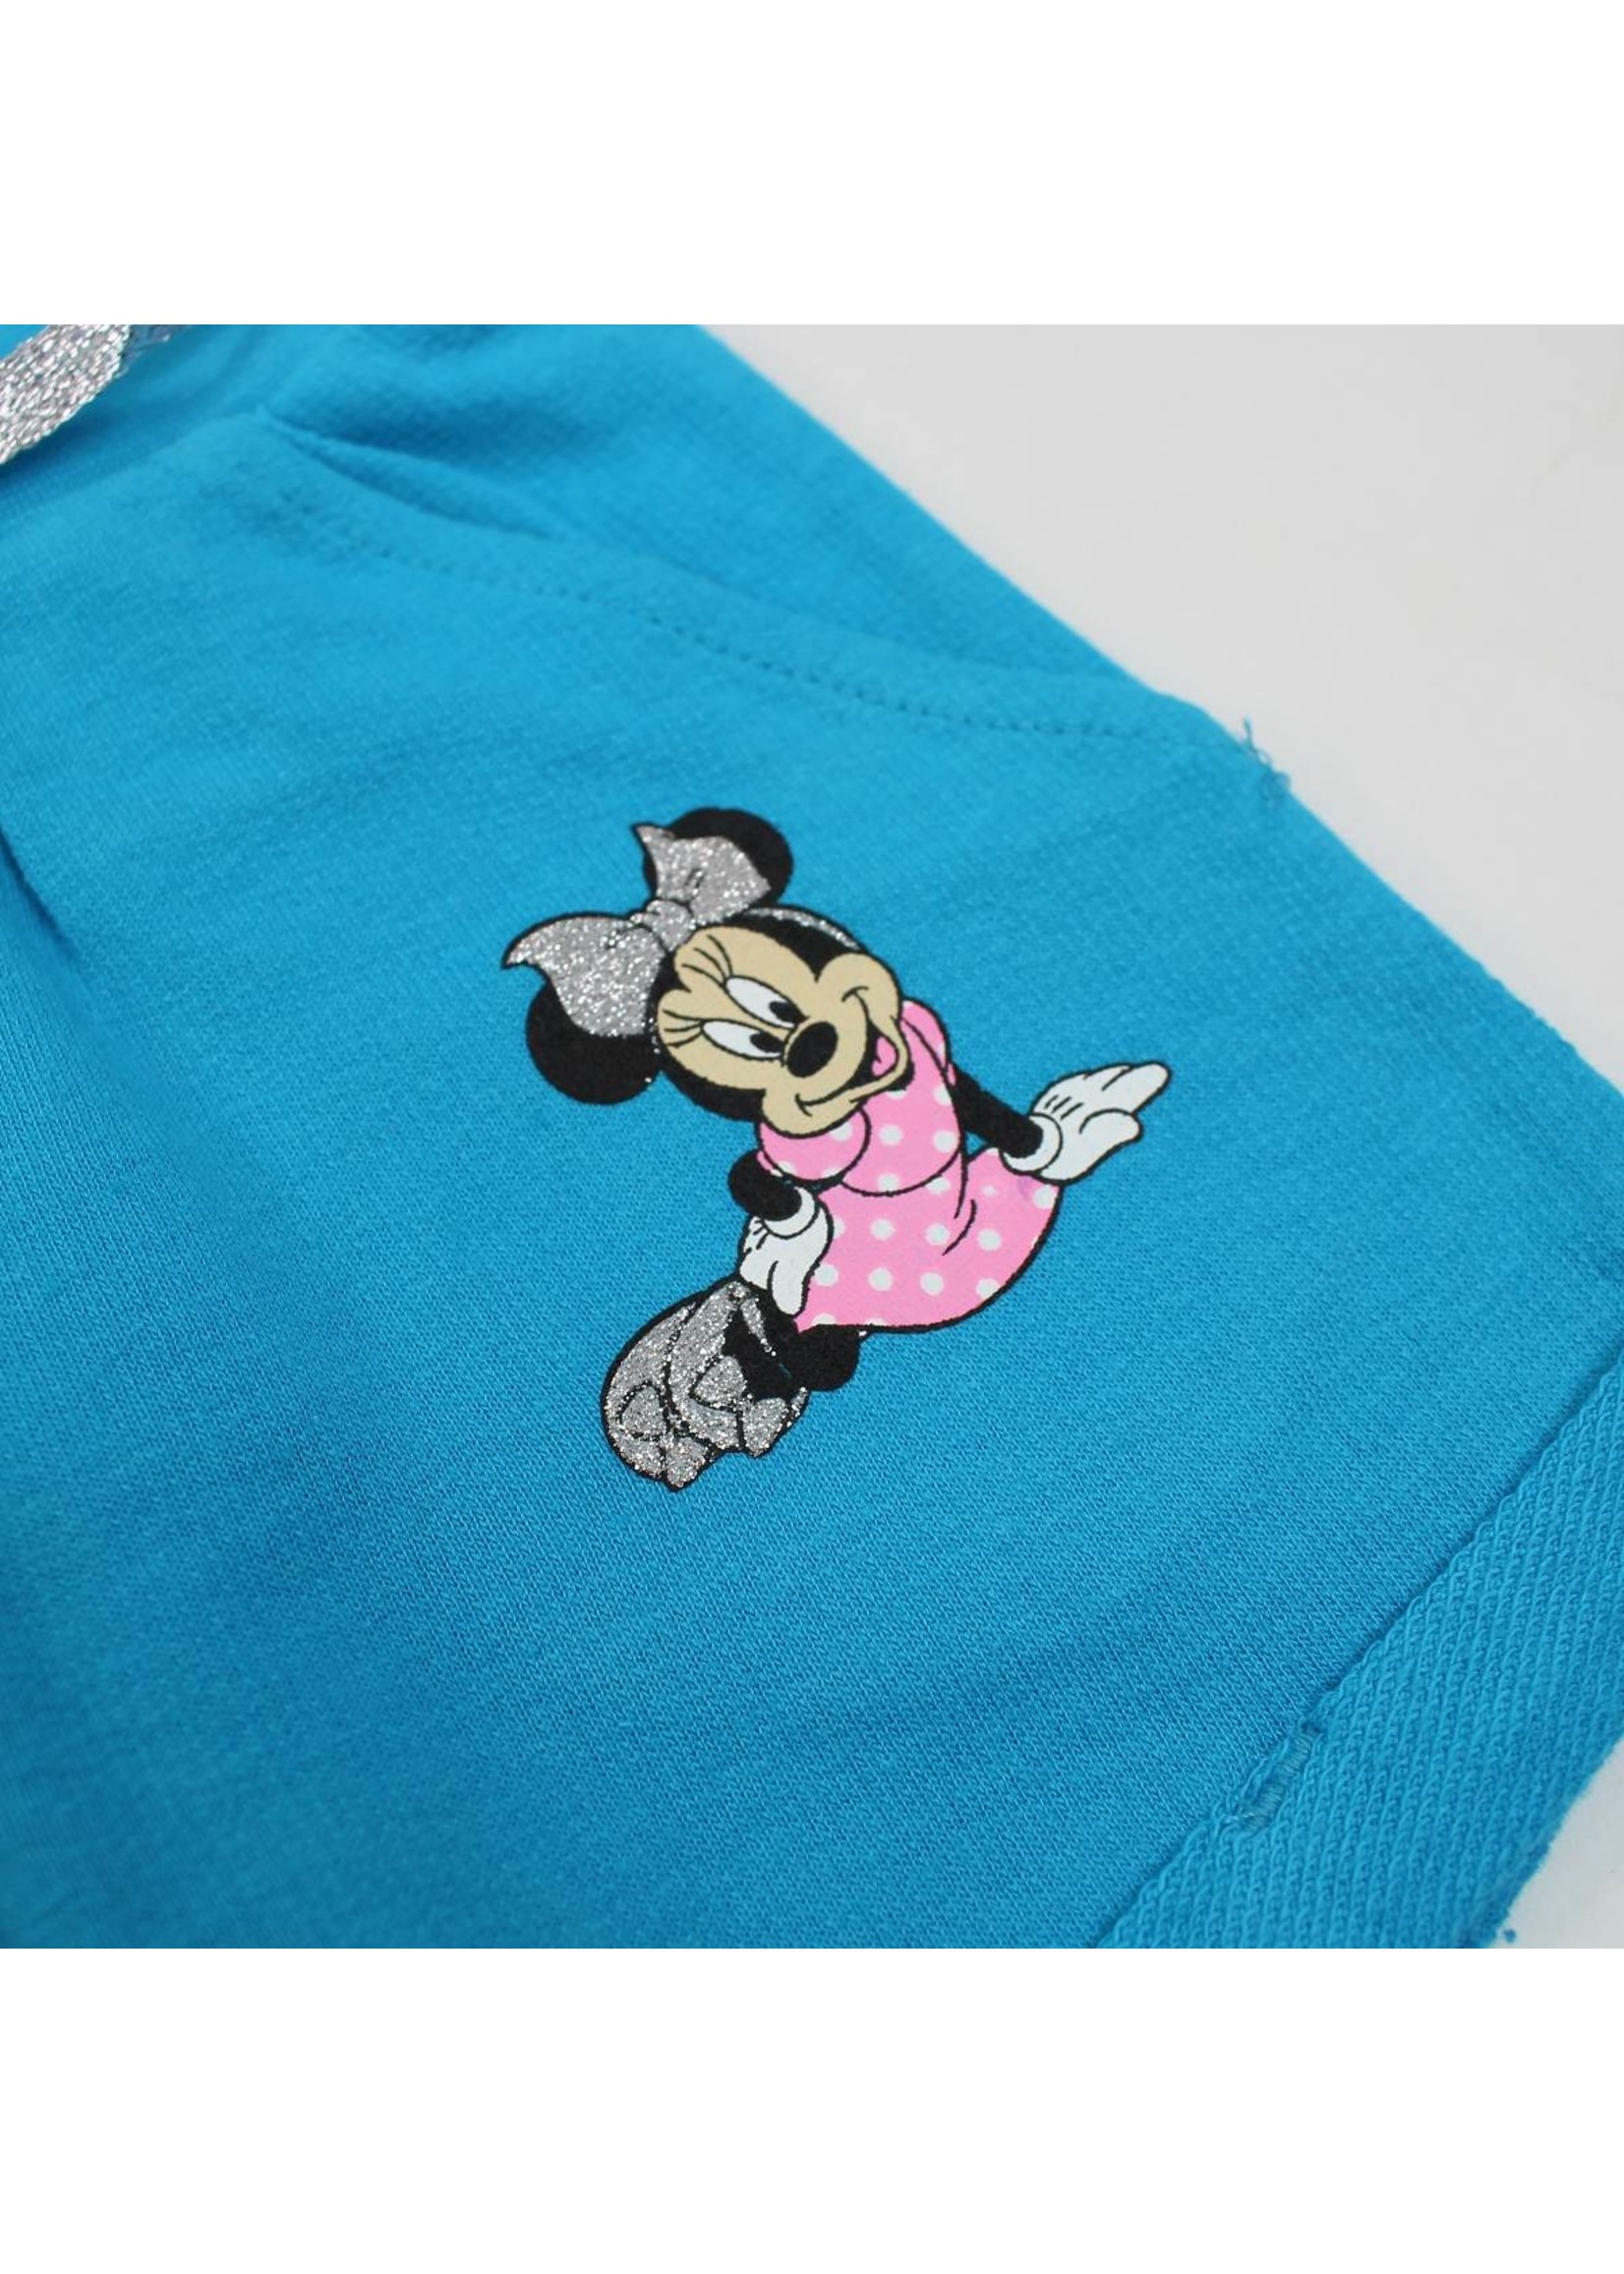 Disney baby Minnie Mouse summer set from Disney baby blue